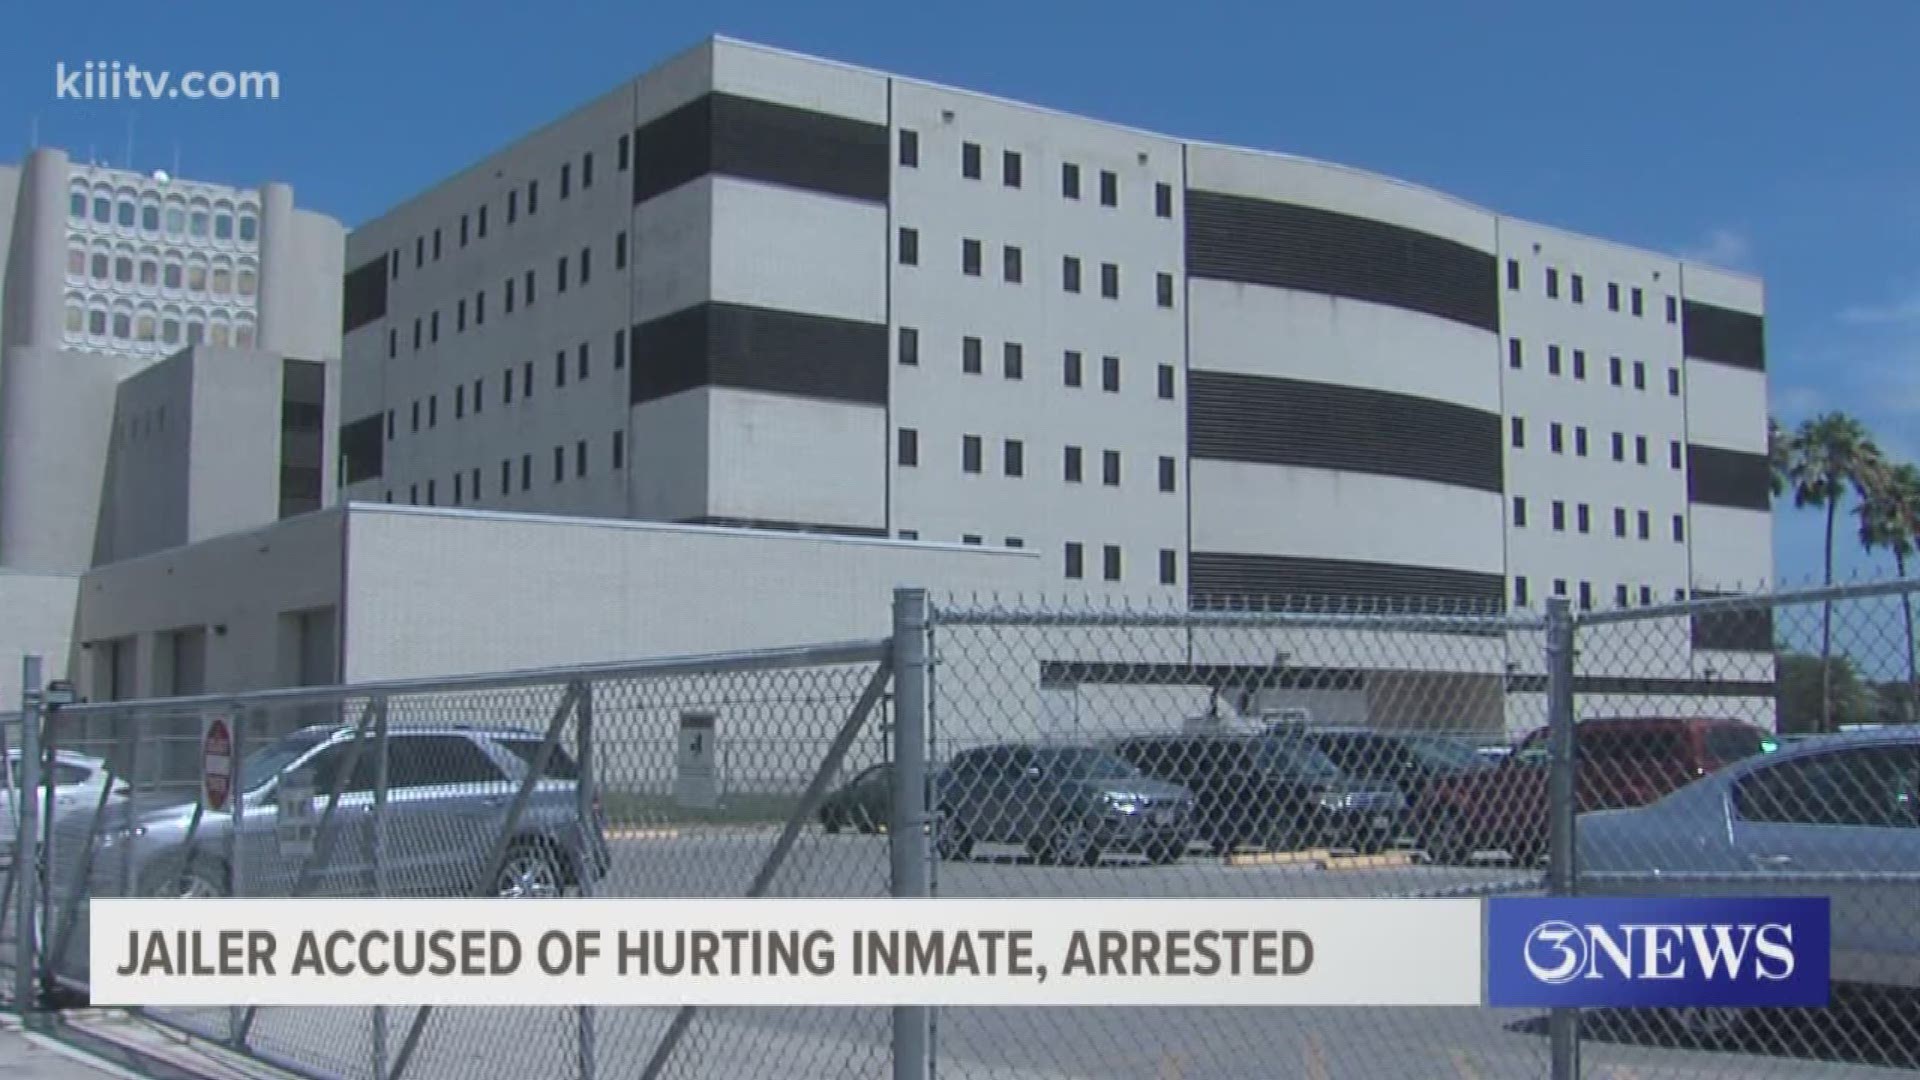 Bobby Joe Benavides has since resigned and currently remains in Nueces County Jail.